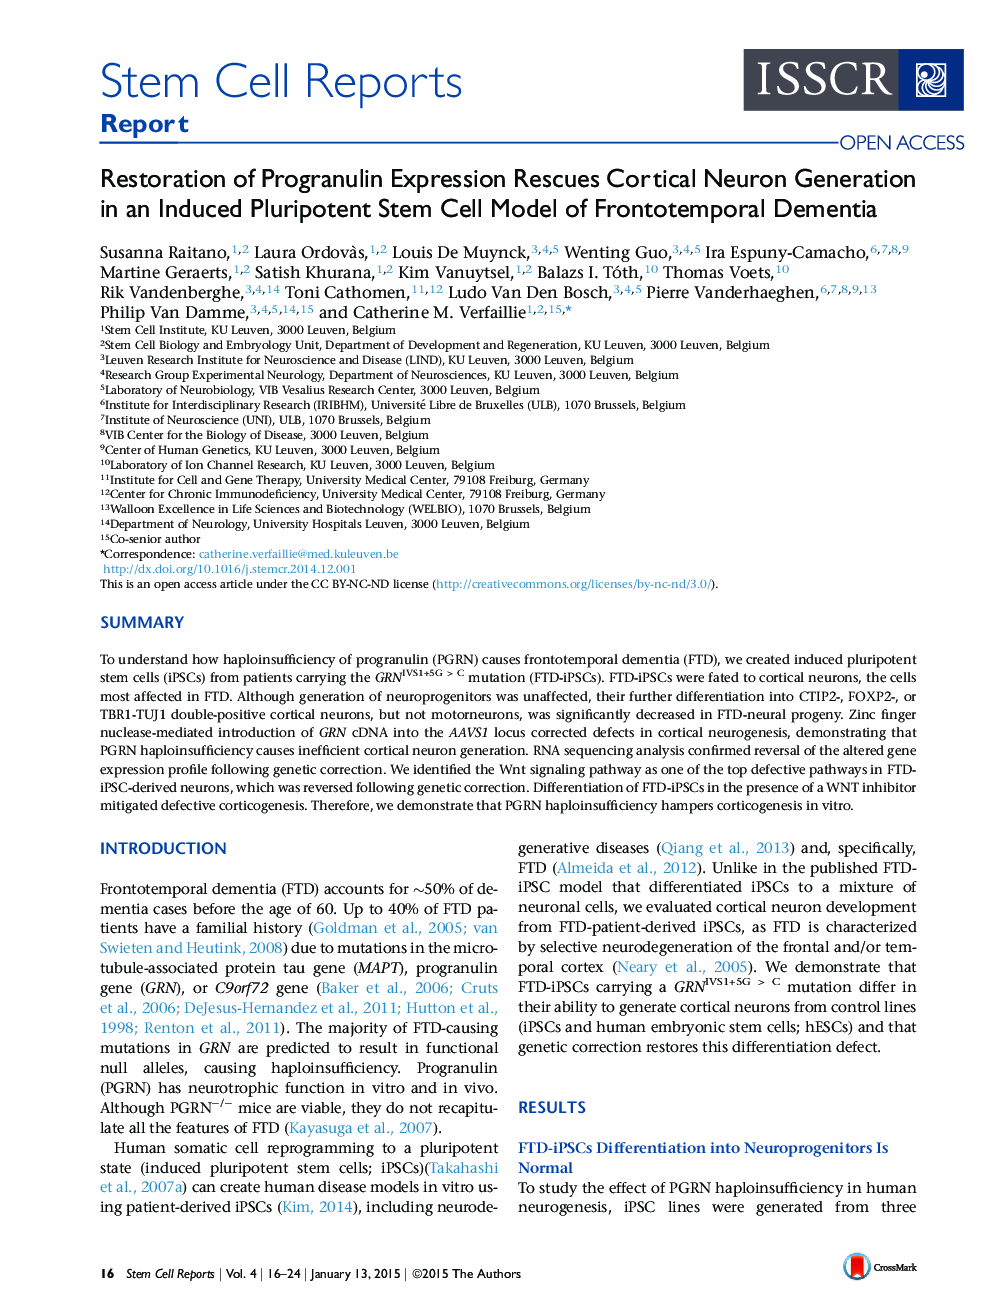 Restoration of Progranulin Expression Rescues Cortical Neuron Generation in an Induced Pluripotent Stem Cell Model of Frontotemporal Dementia 